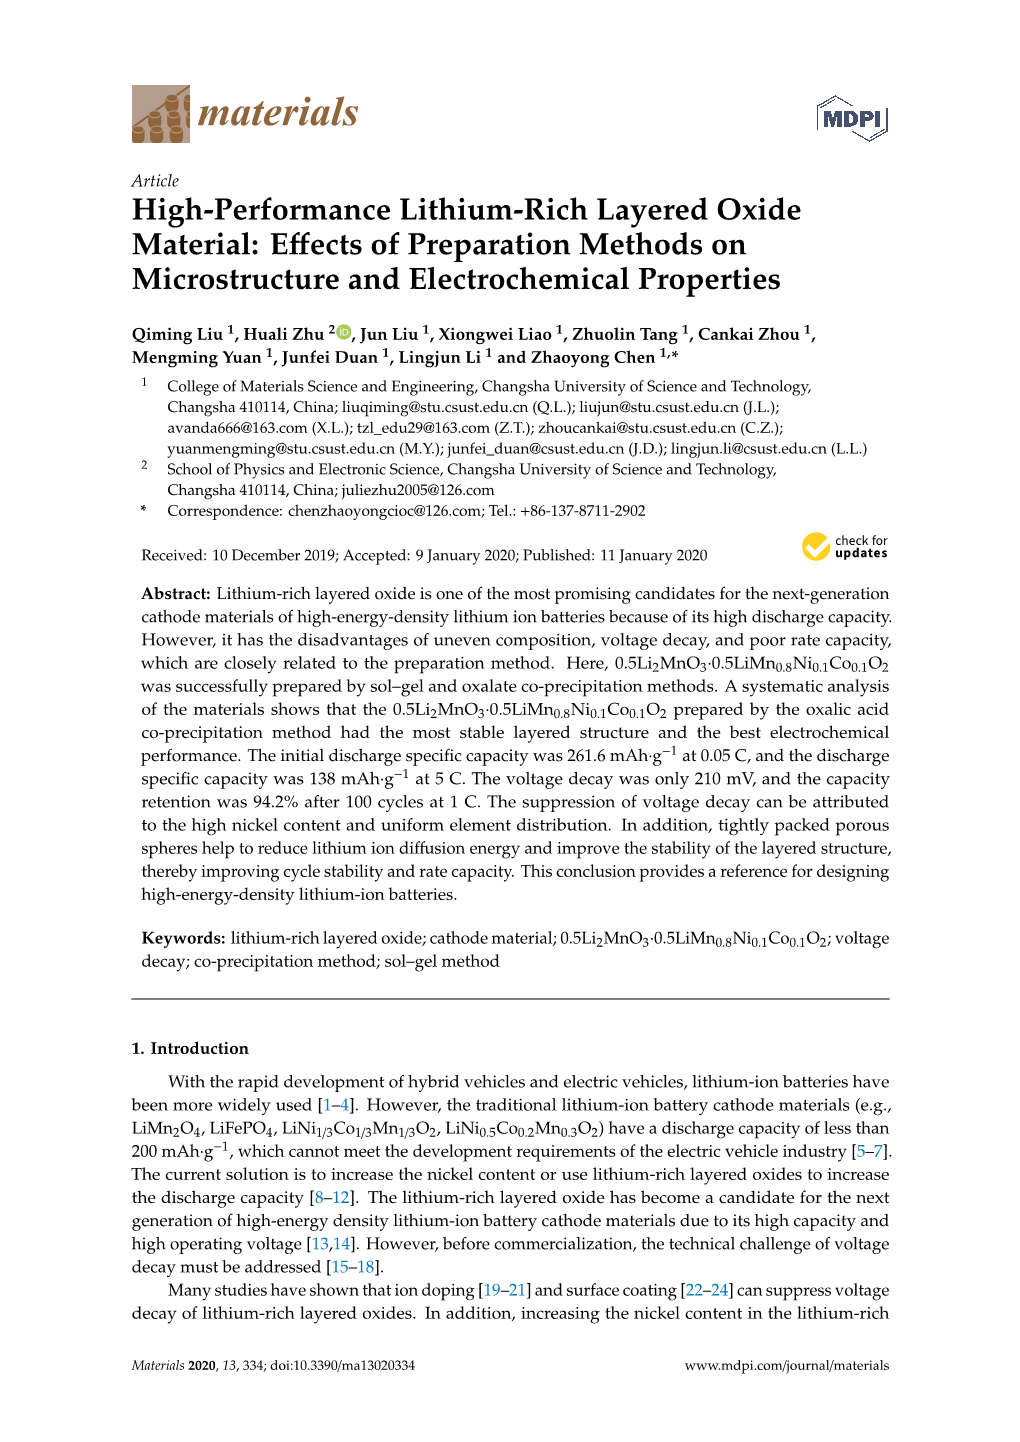 High-Performance Lithium-Rich Layered Oxide Material: Effects of Preparation Methods on Microstructure and Electrochemical Prope